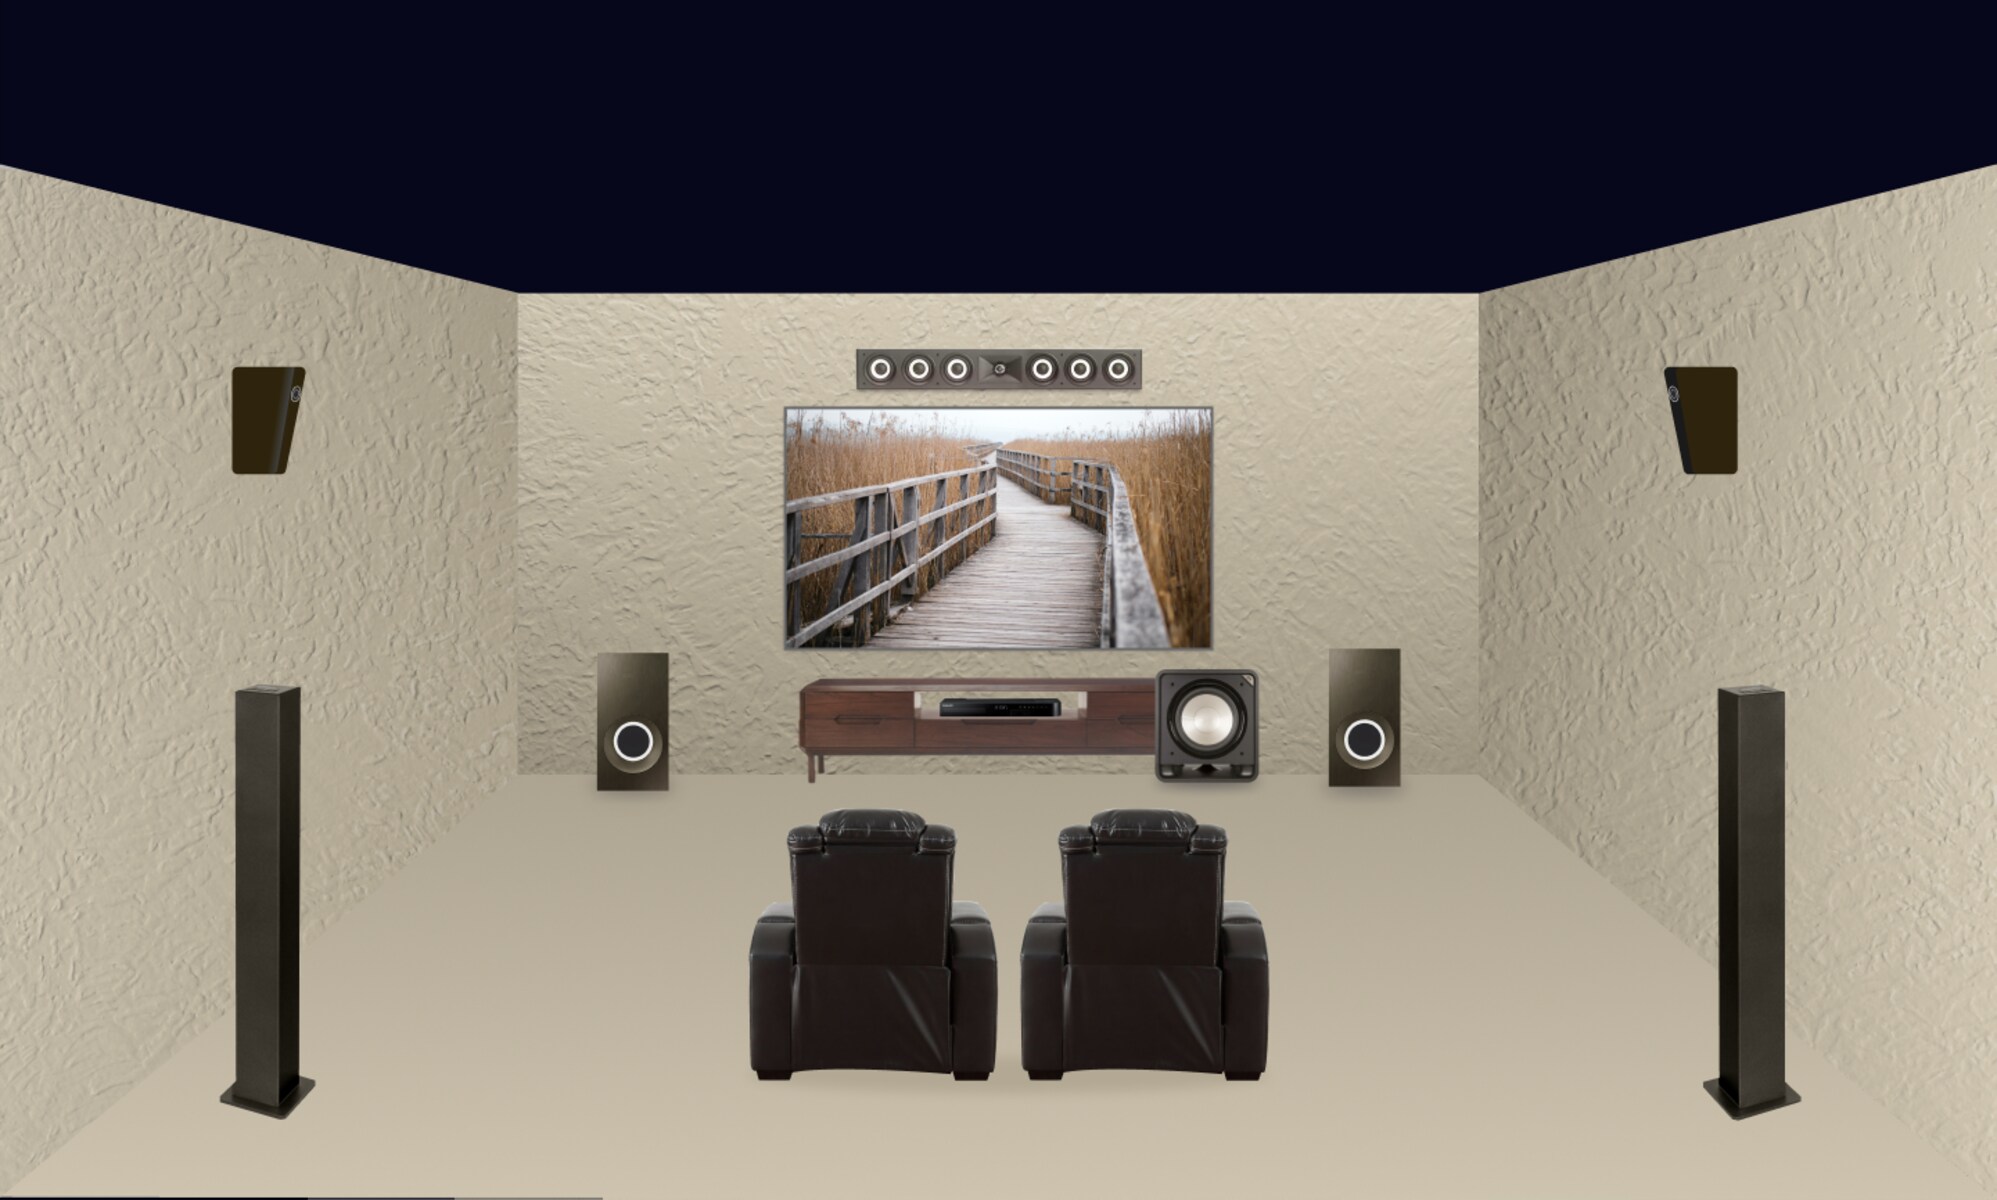 How To Set Up Surround Sound System For A Small Room